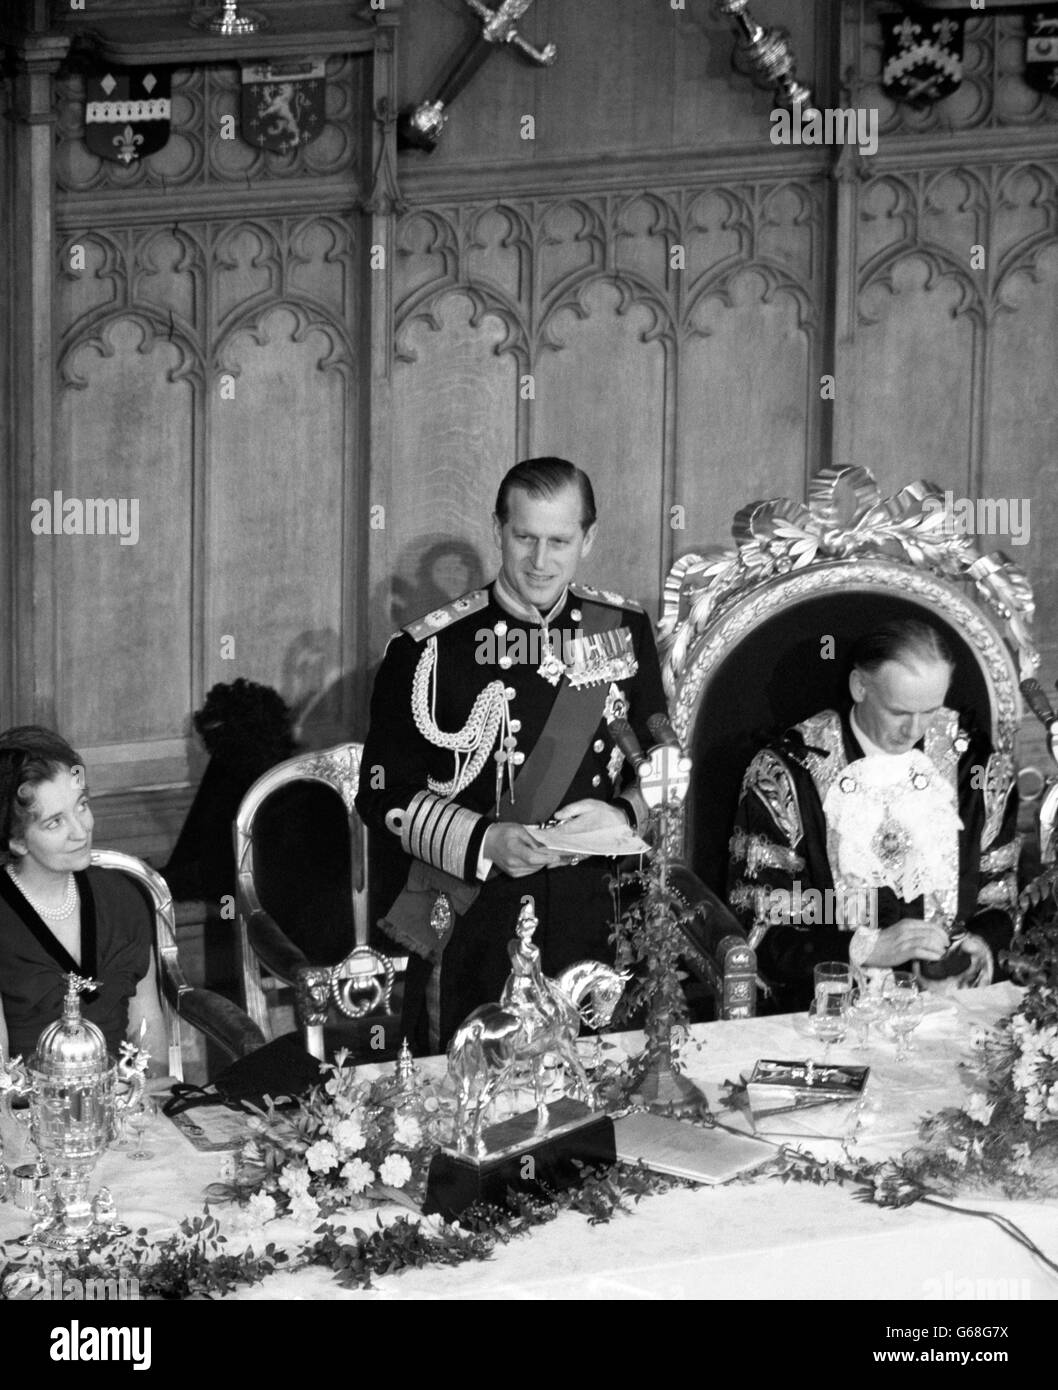 Prince Philip, The Duke of Edinburgh - wearing the uniform of Admiral of the Fleet - speaks at a luncheon in Guildhall, London. In front of him on the table is an equestrain statuette of the Queen in her Trooping the Colour uniform. The luncheon was given by the Lord Mayor and Corporation of the City to the Duke of Edinburgh, the Duke and Duchess of Gloucester and Princess Alexandra of Kent to mark their tours abroad. Stock Photo